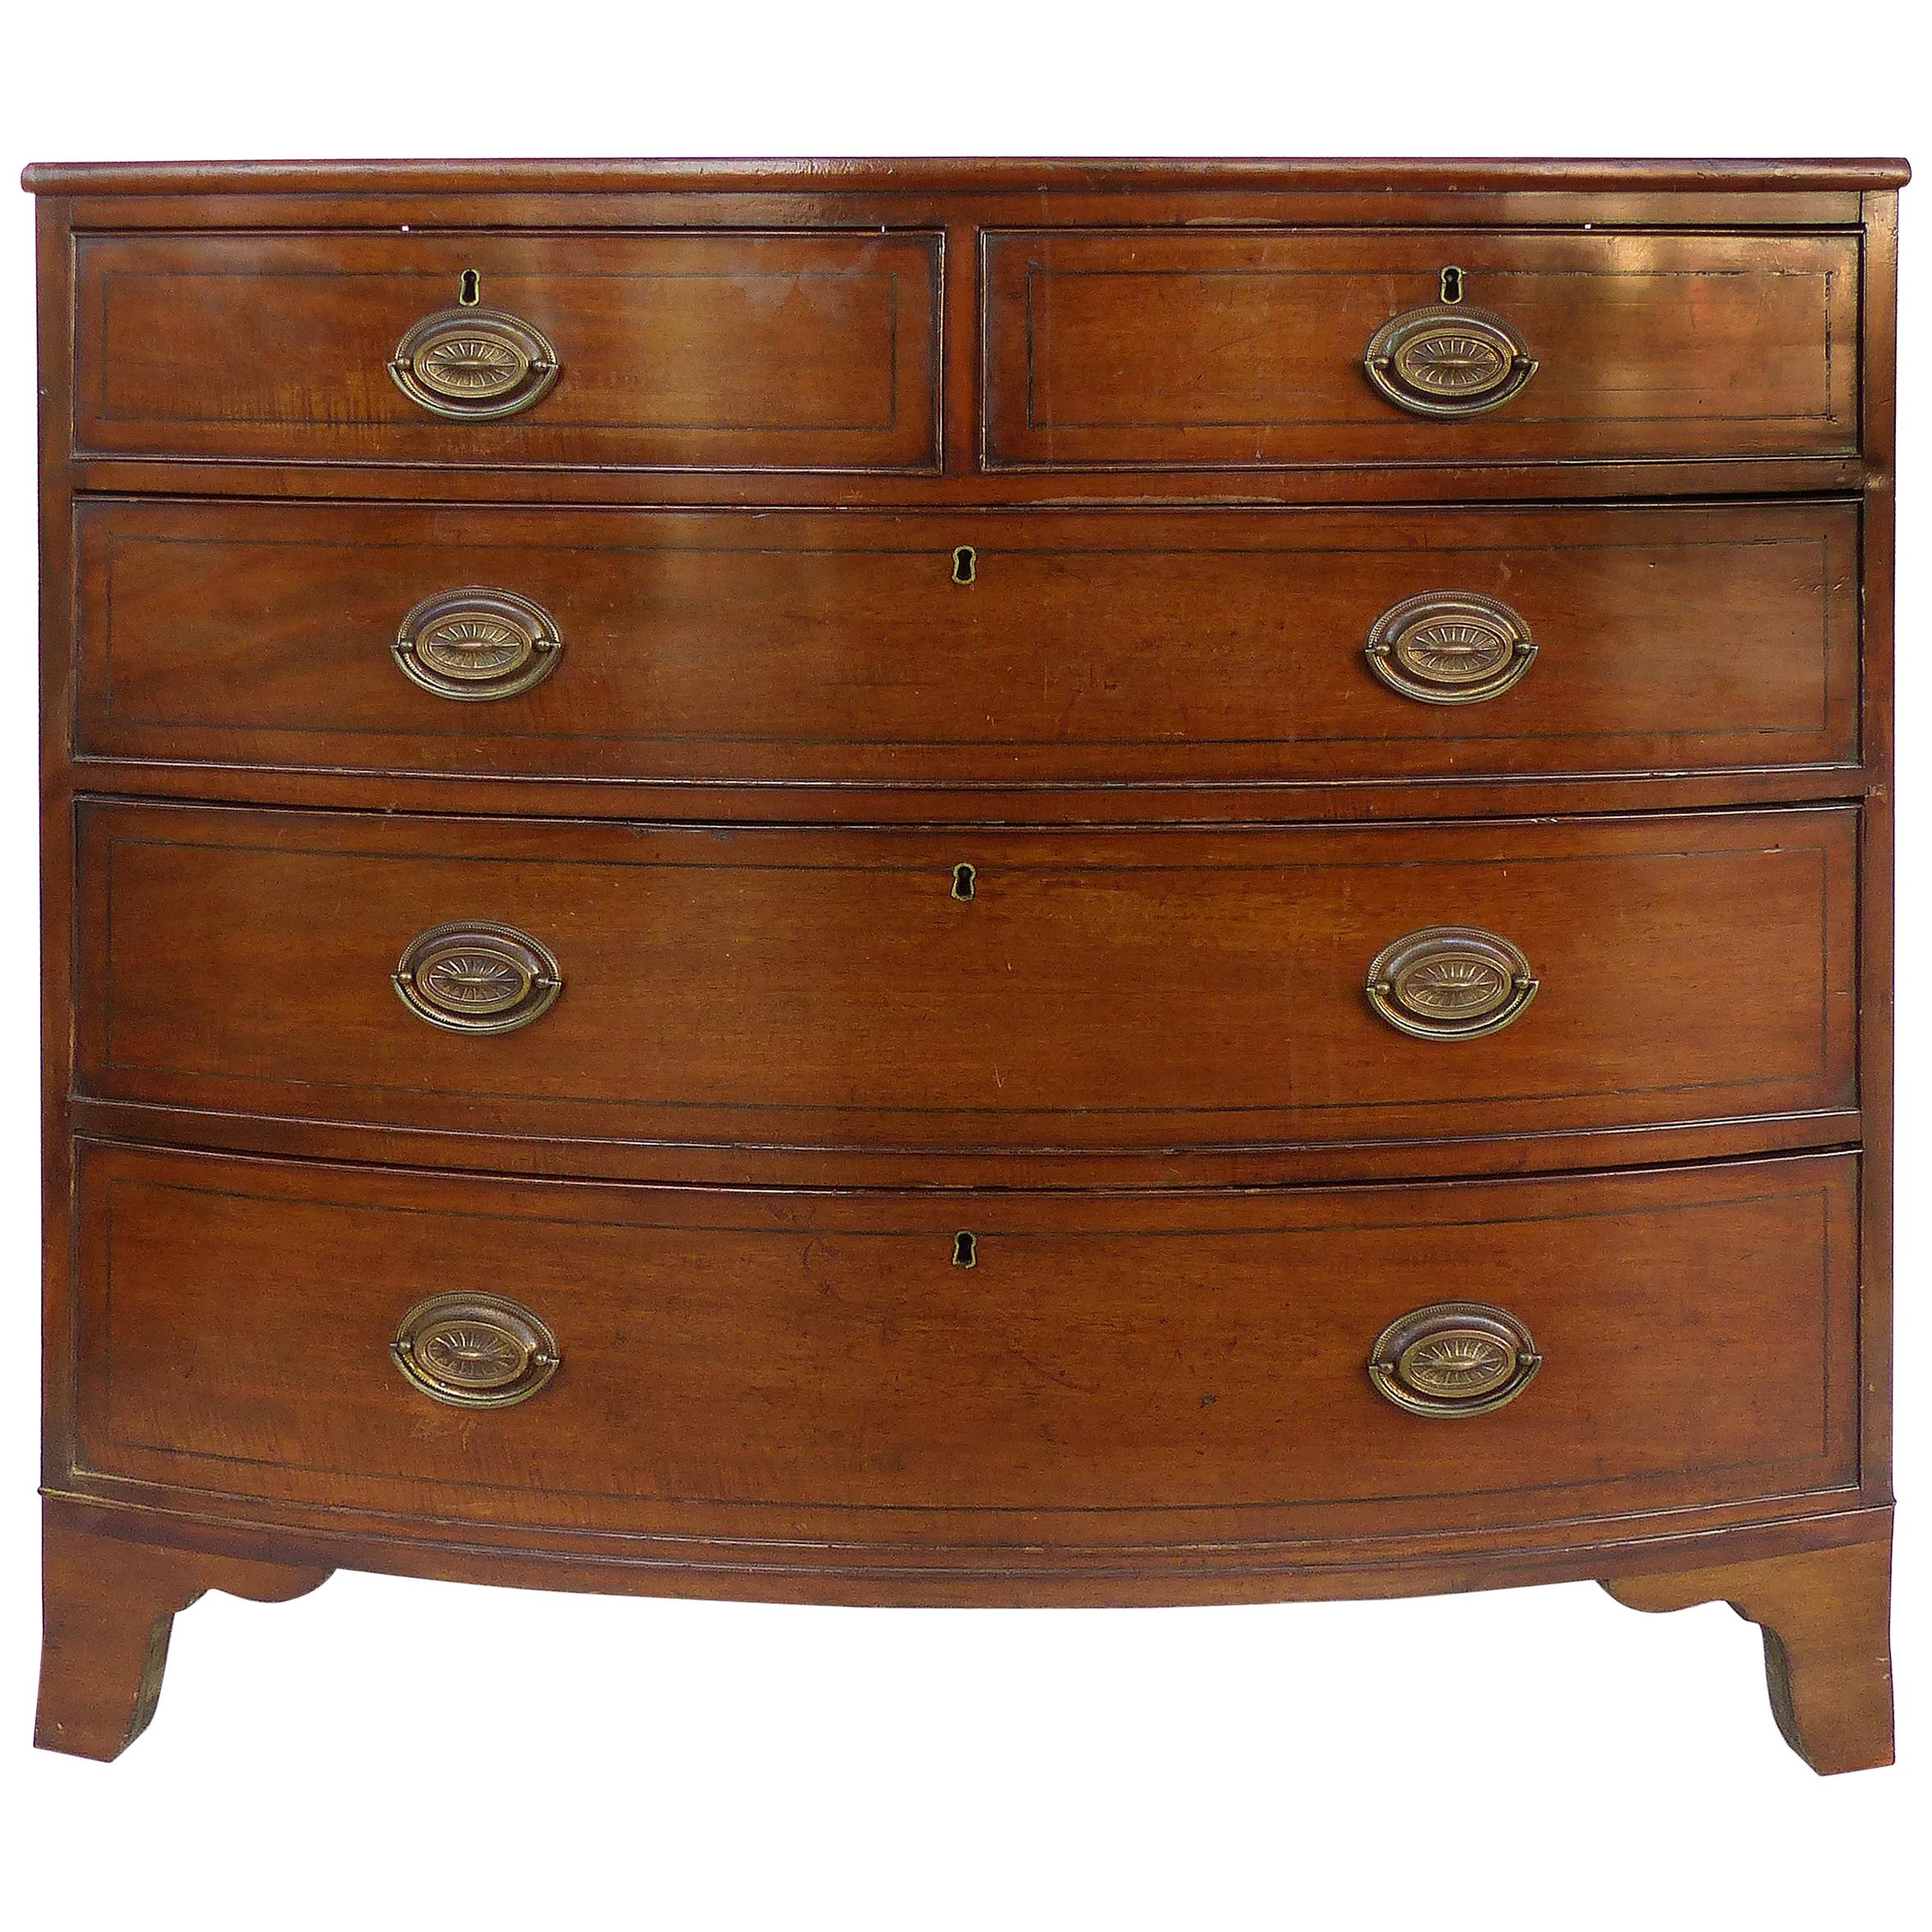 Antique Hepplewhite Bow-Front Chest of Drawers in Mahogany